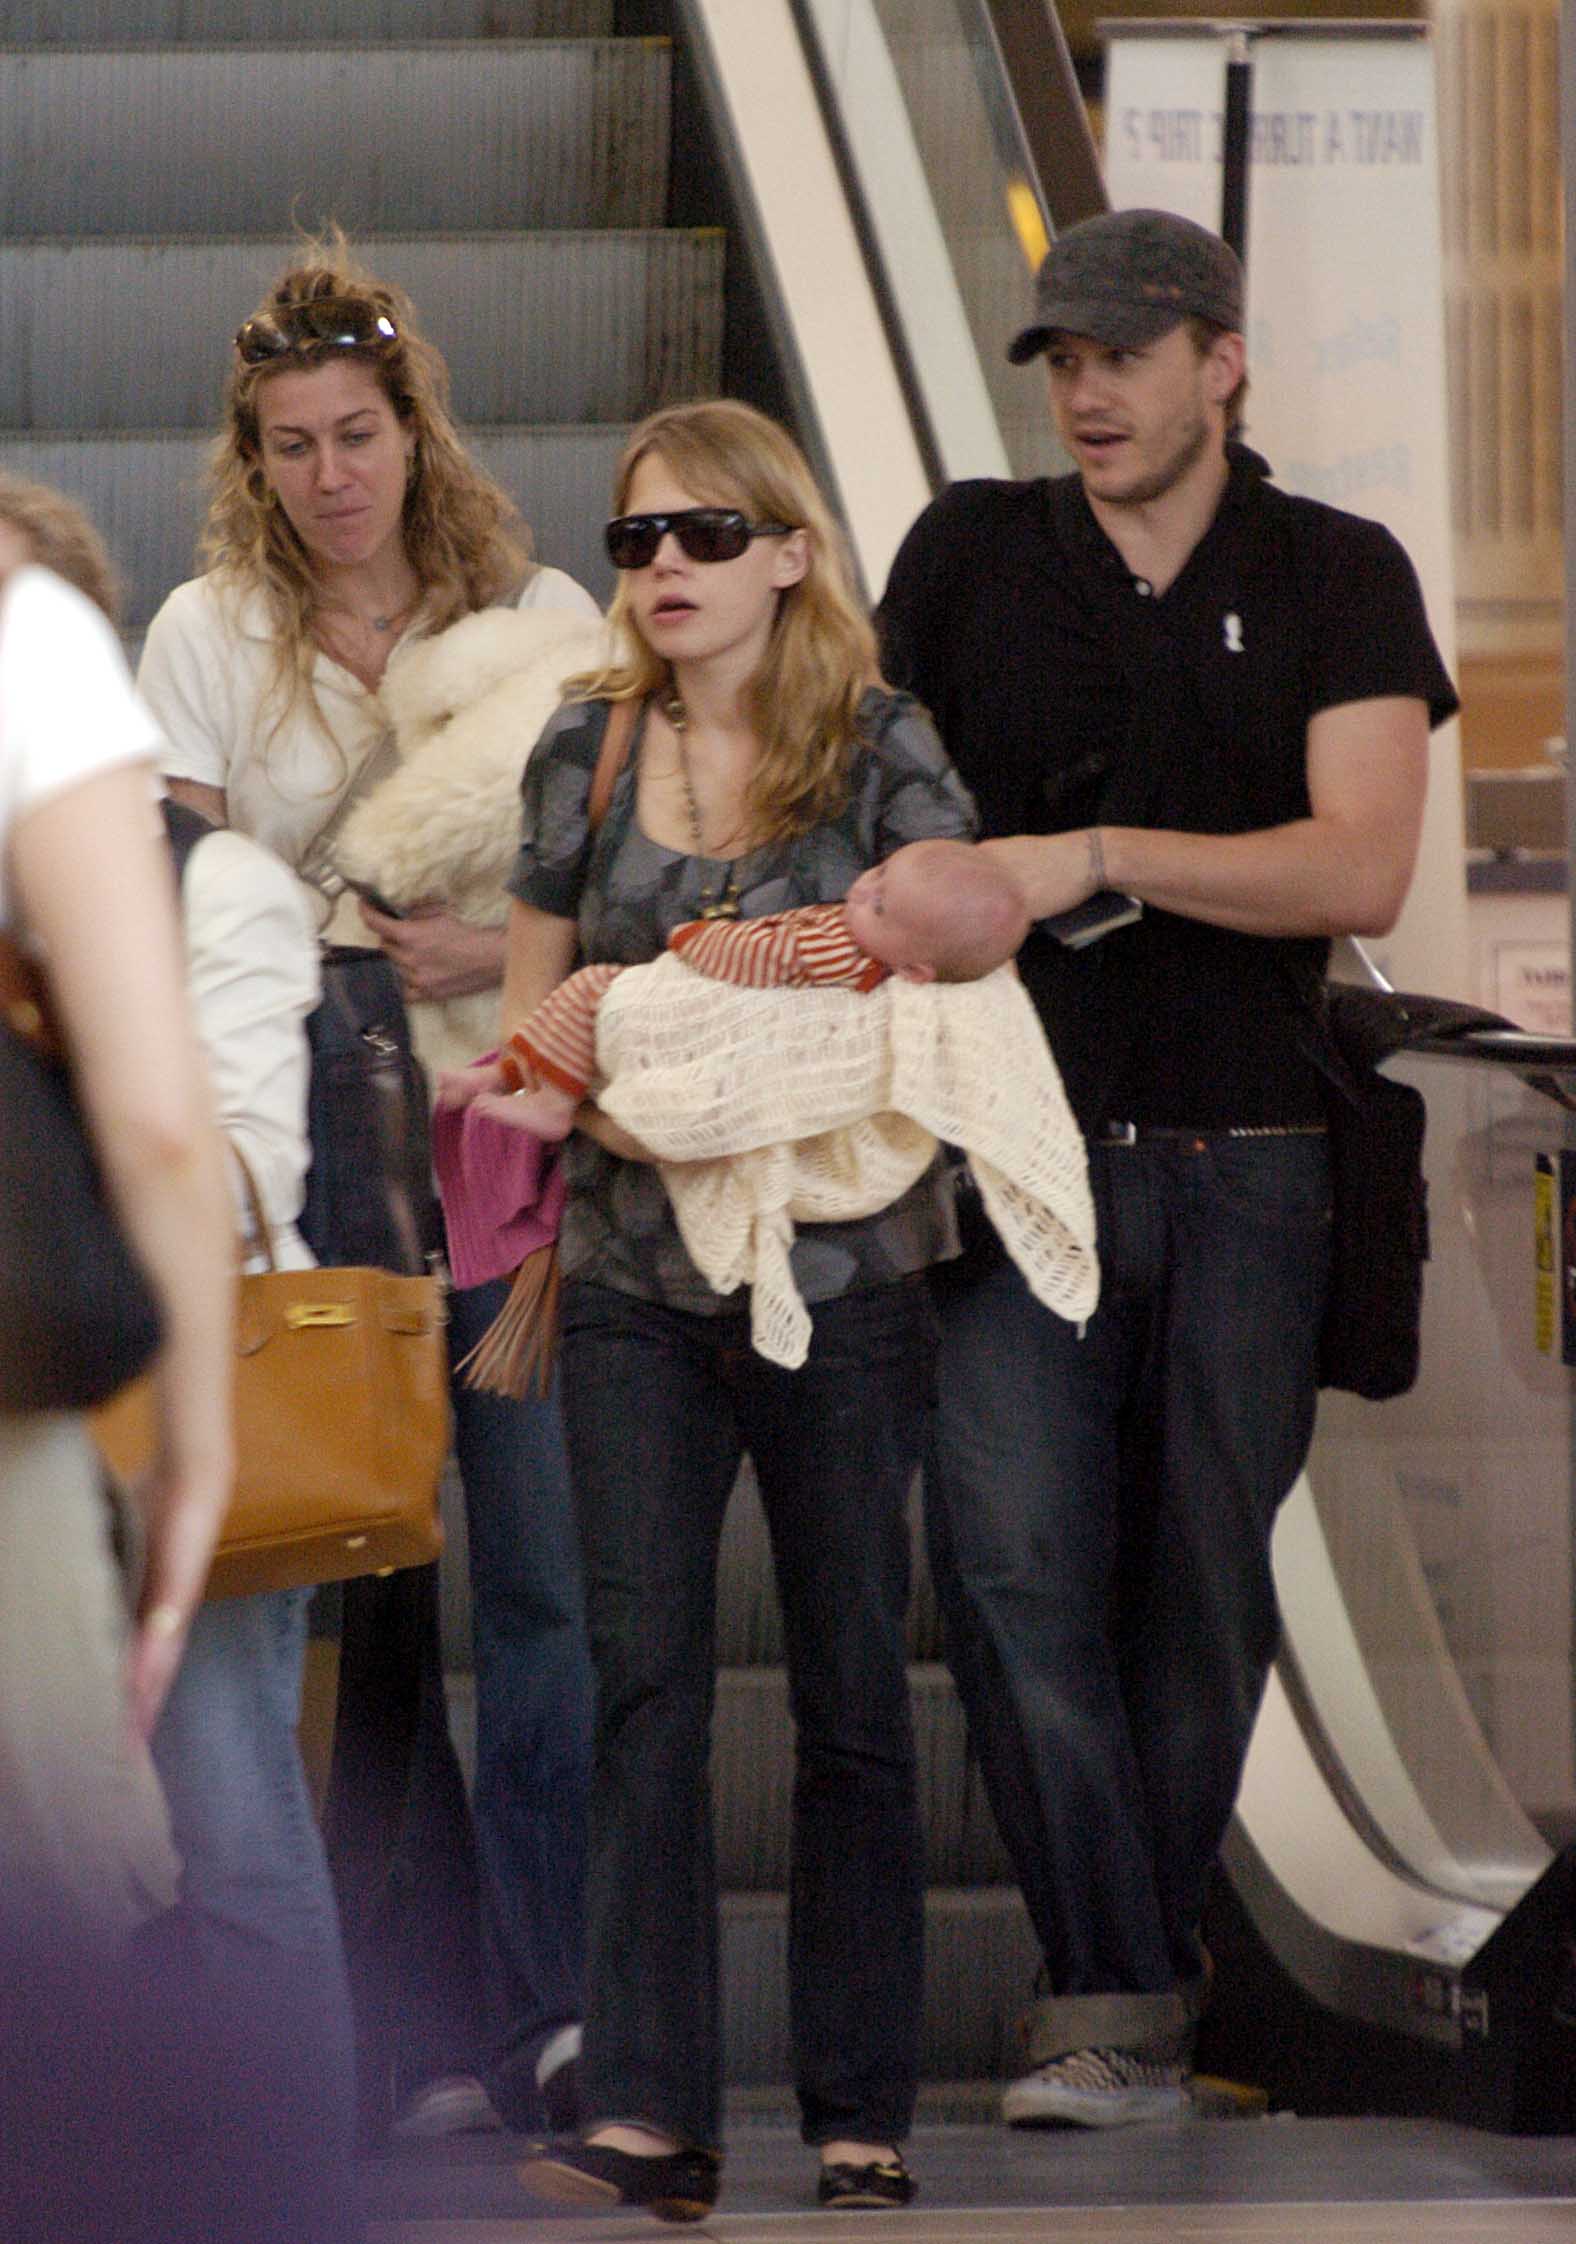 The actor, his wife and daughter leave Sydney International Airport for their New York home on January 14, 2006 in Sydney, Australia. | Source: Getty Images